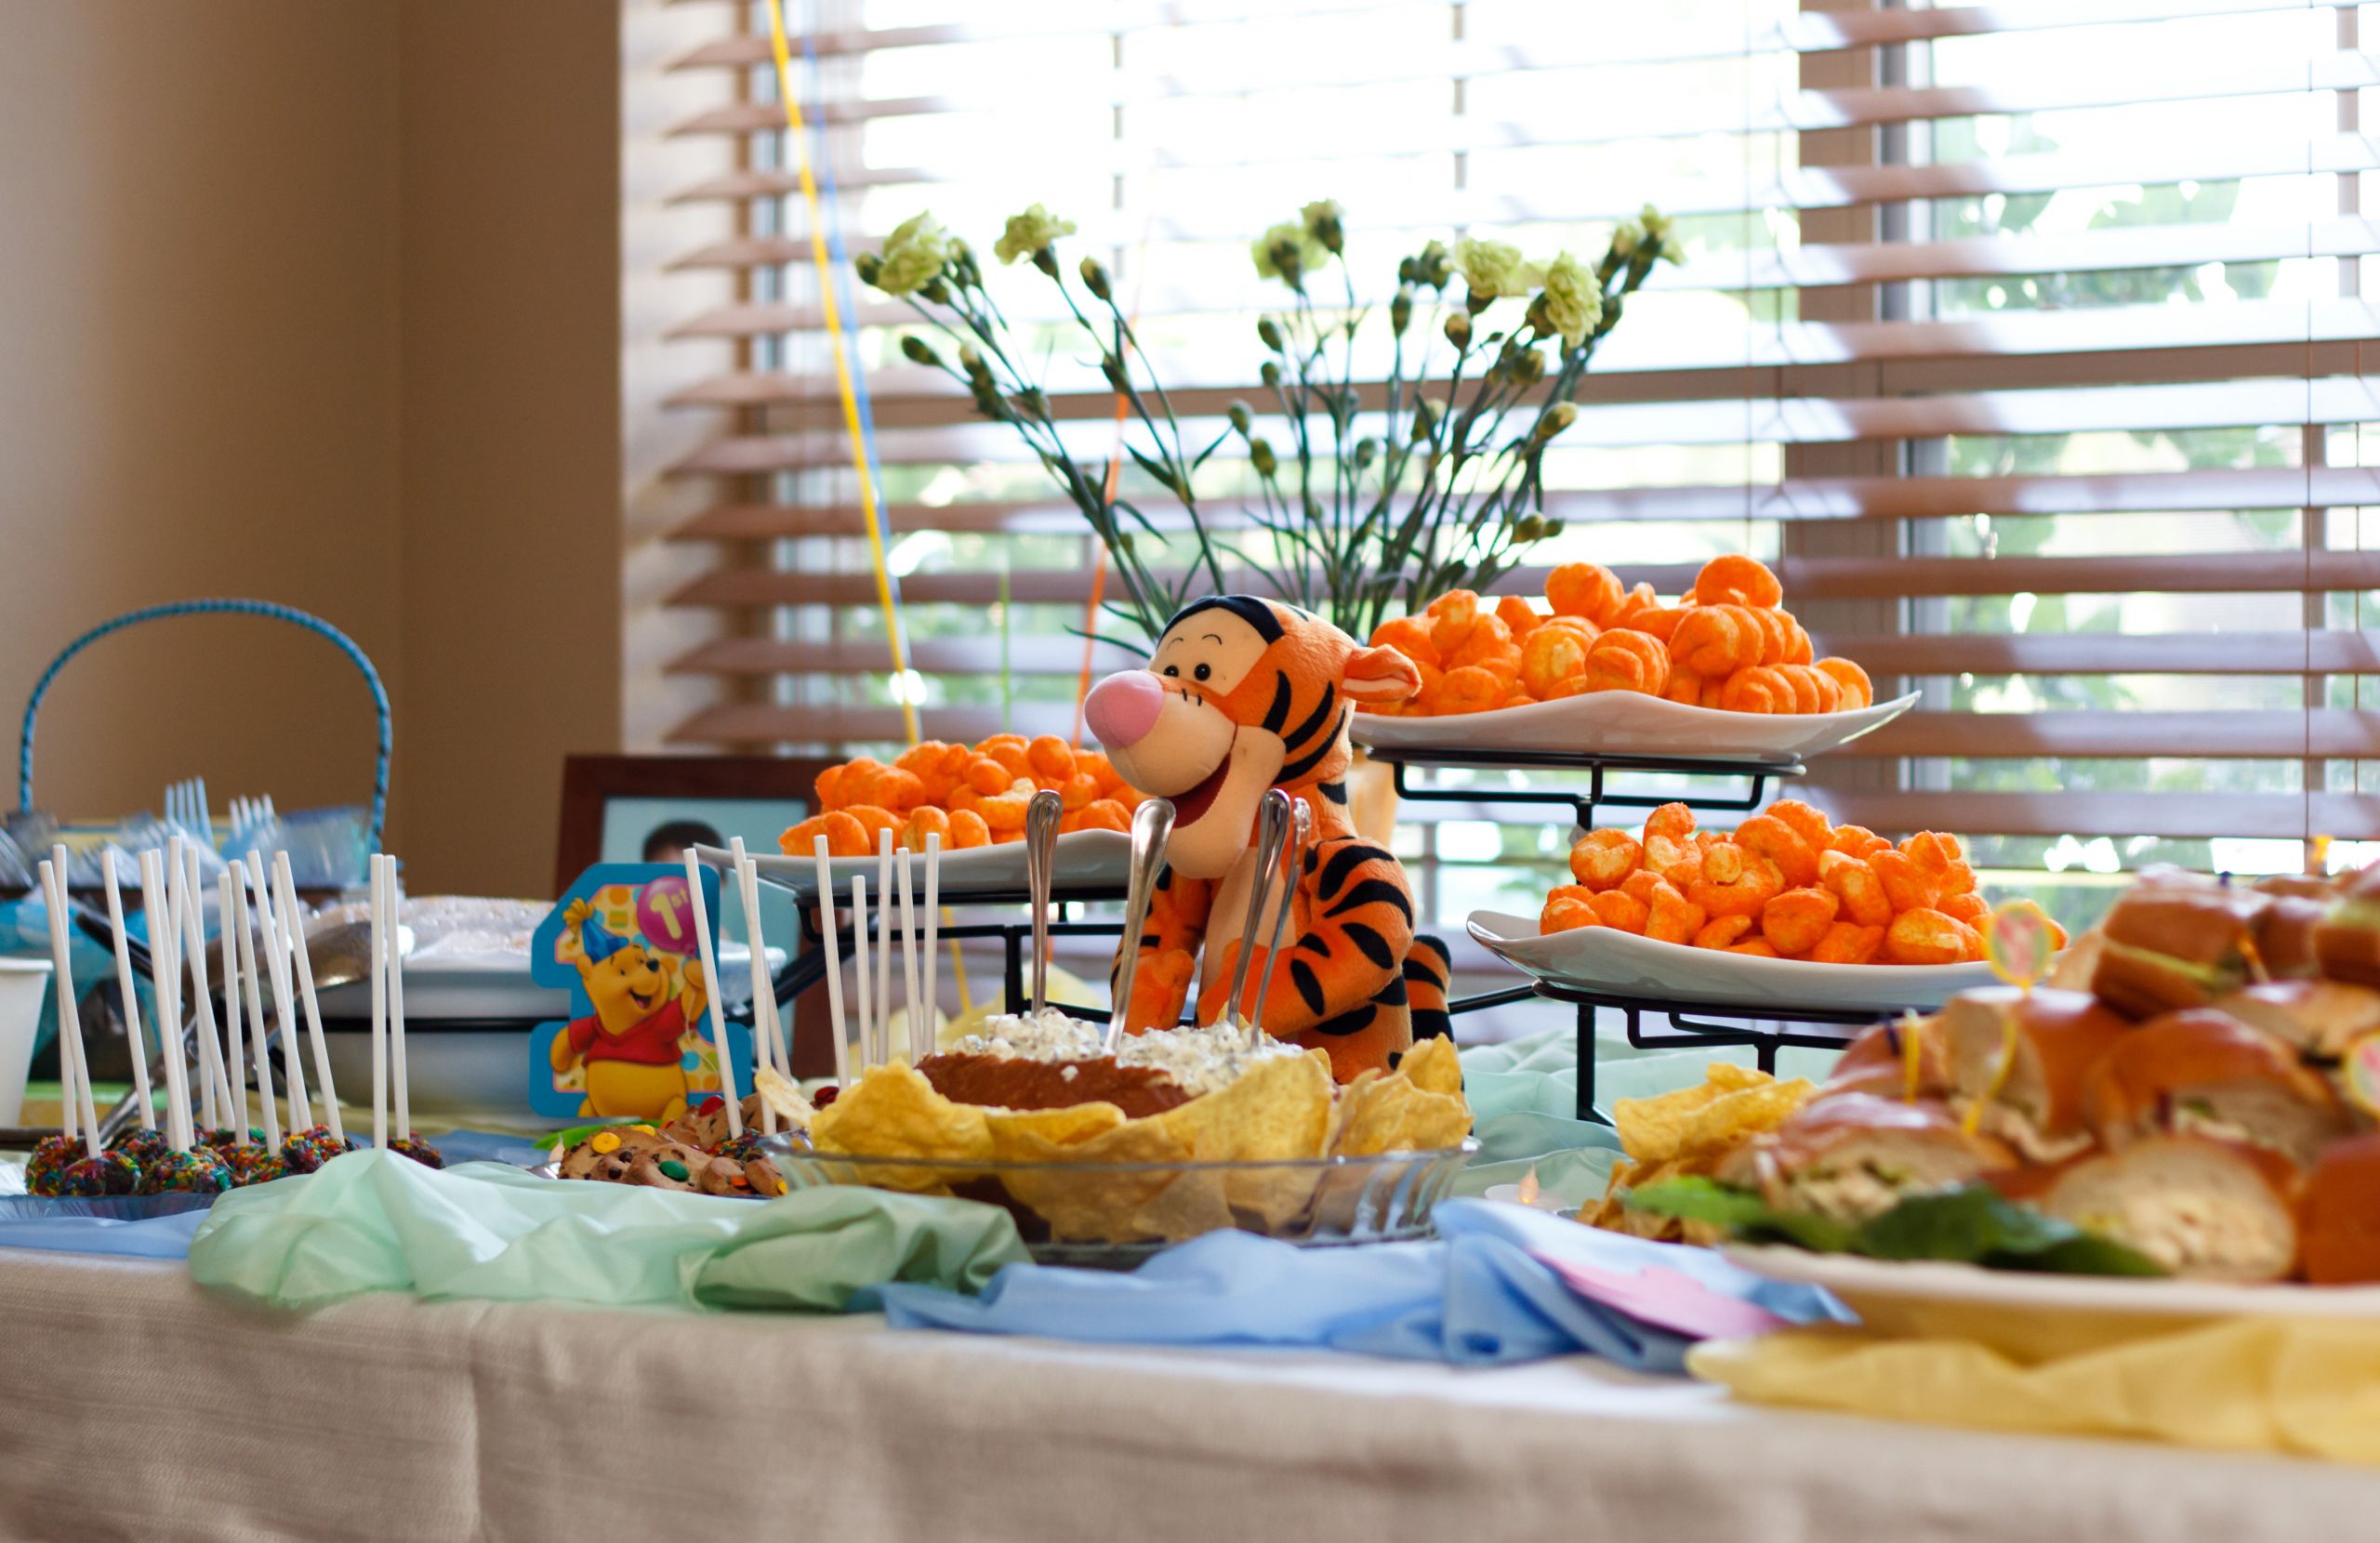 Winnie The Pooh Decorations 1st Birthday
 Winnie the Pooh My son’s first birthday party